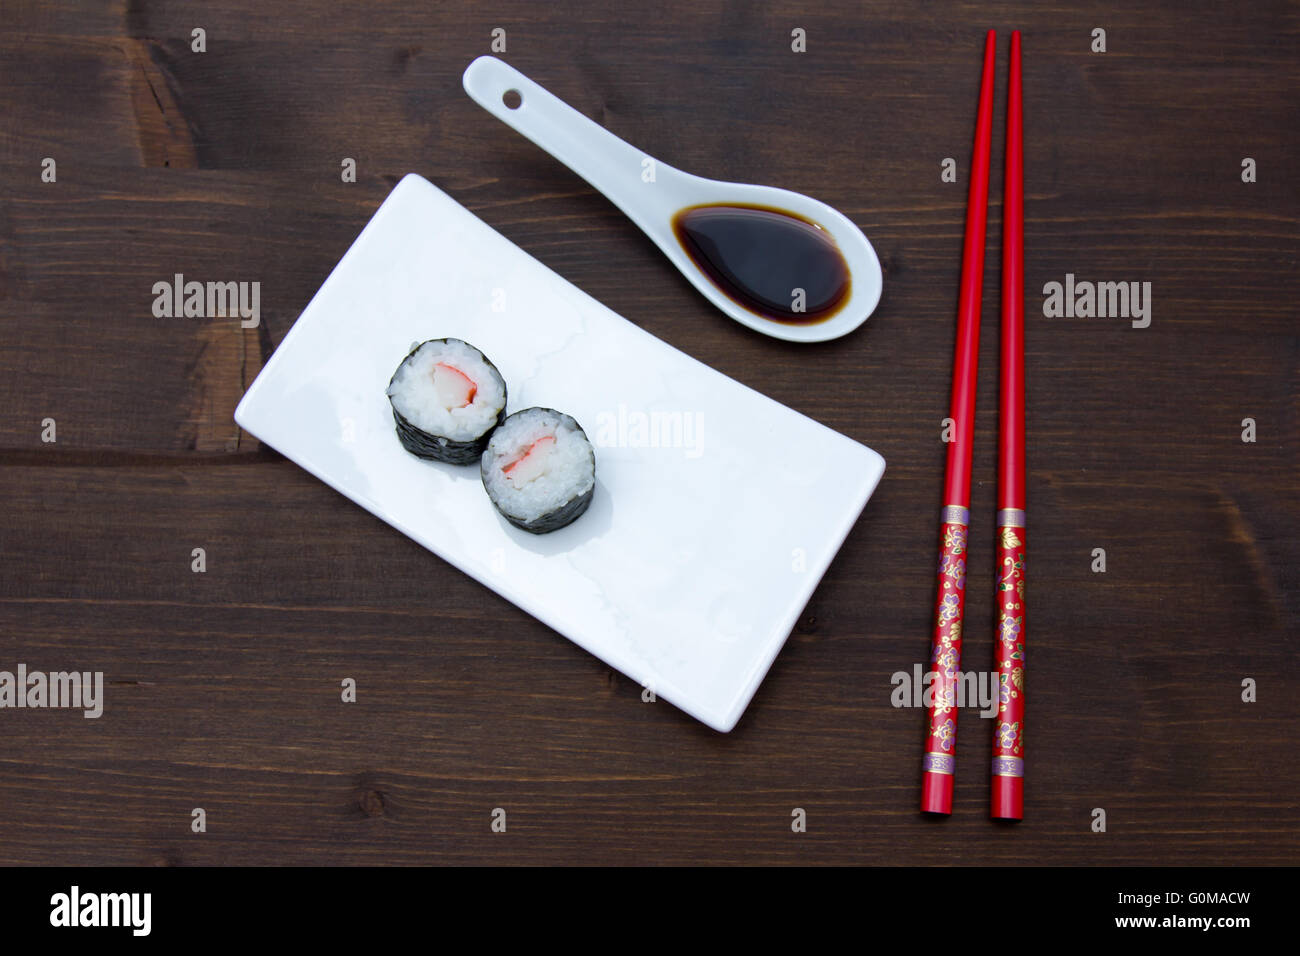 Maki with surimi on a wooden table seen from above Stock Photo